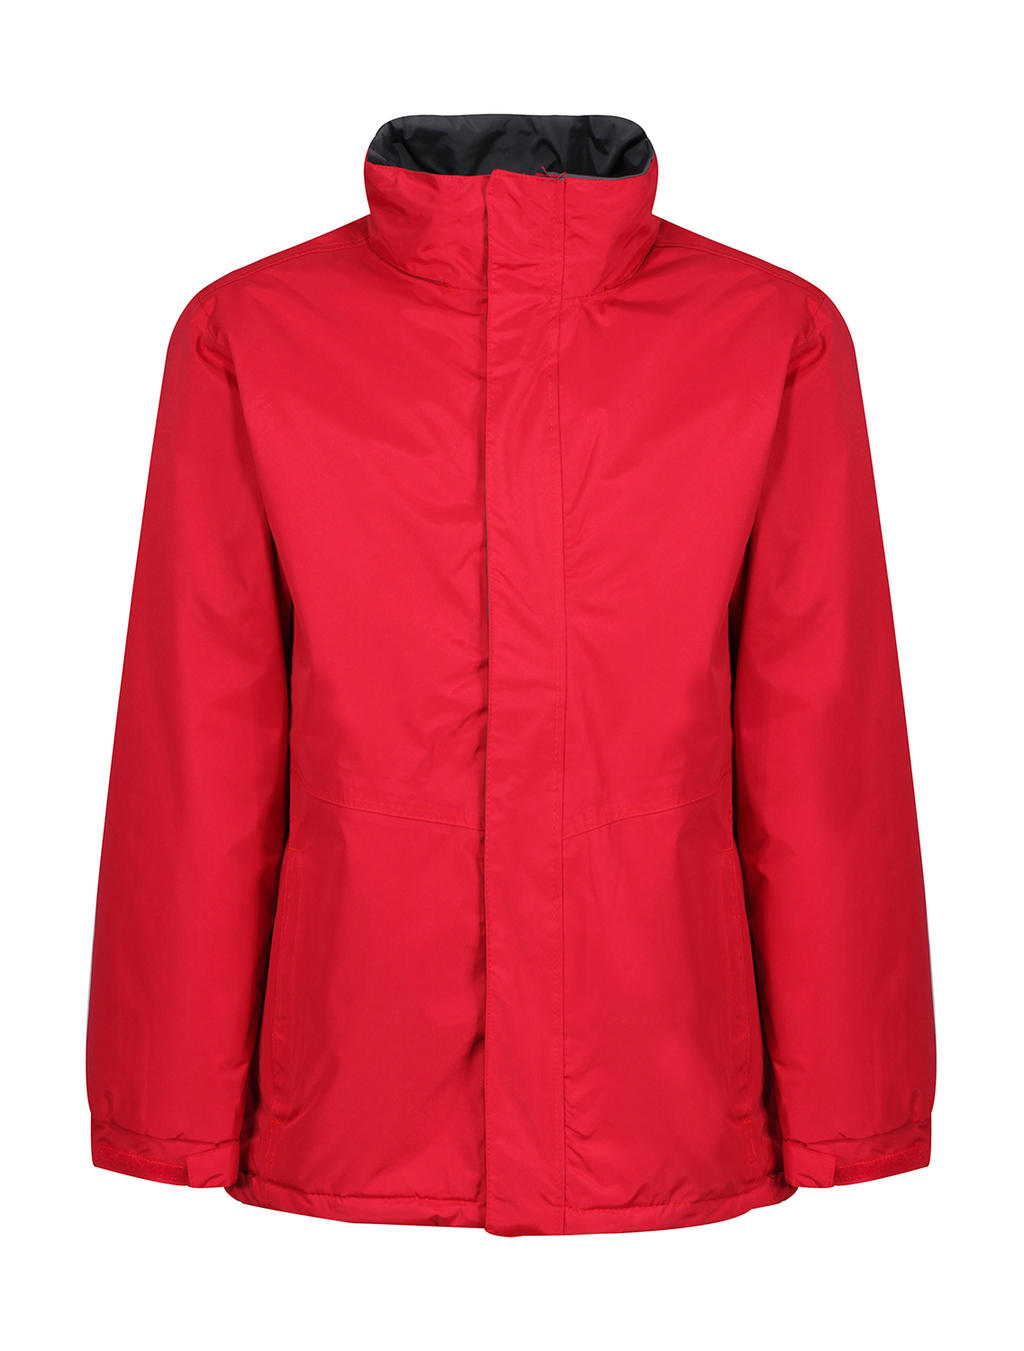  Beauford Insulated Jacket in Farbe Classic Red